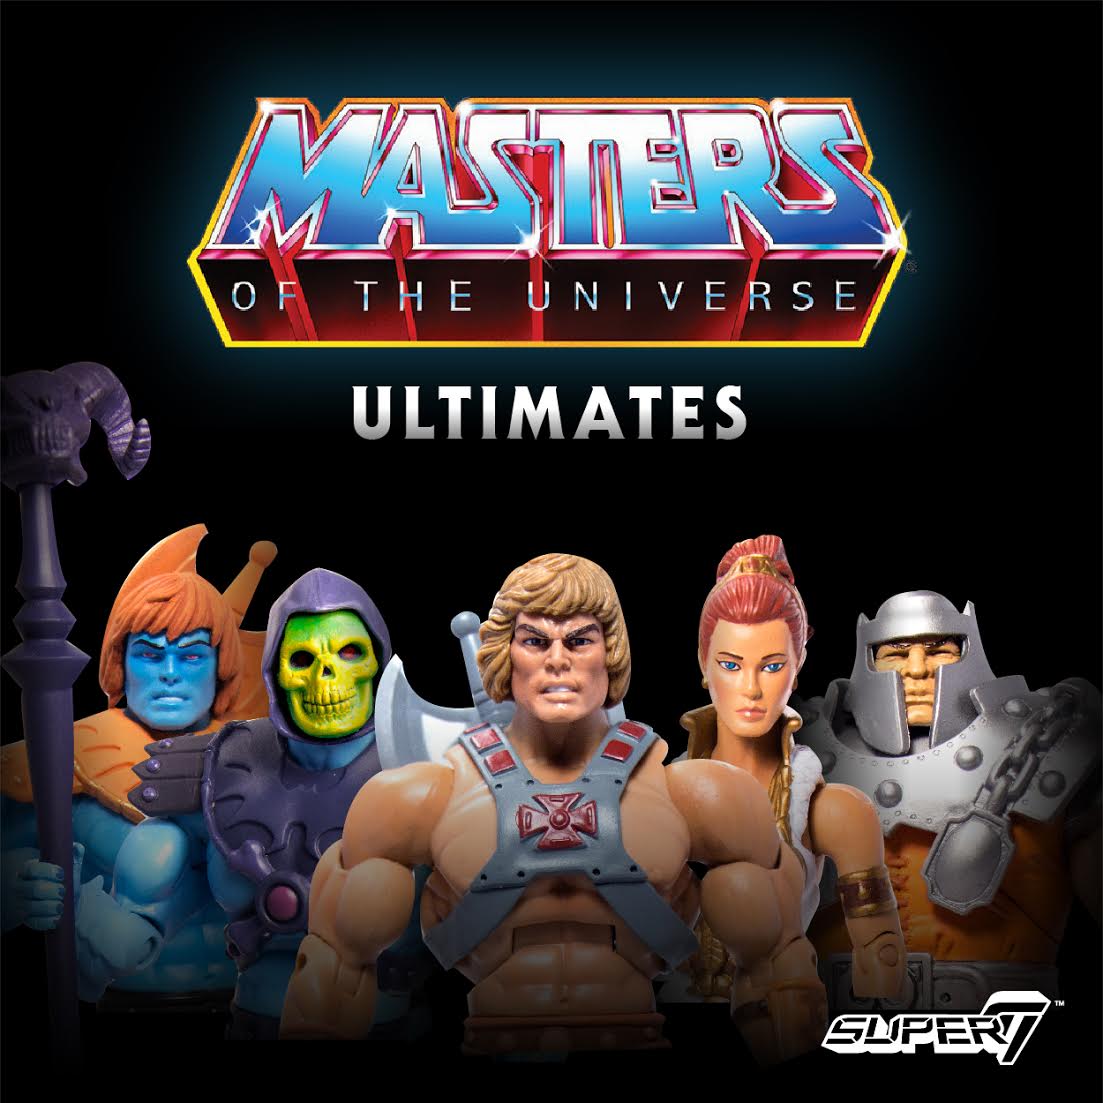 Masters Of The Universe : Toutes les gammes, les news, les marques & sorties ... - Page 13 MOTU_ULTIMATES_SQUARE